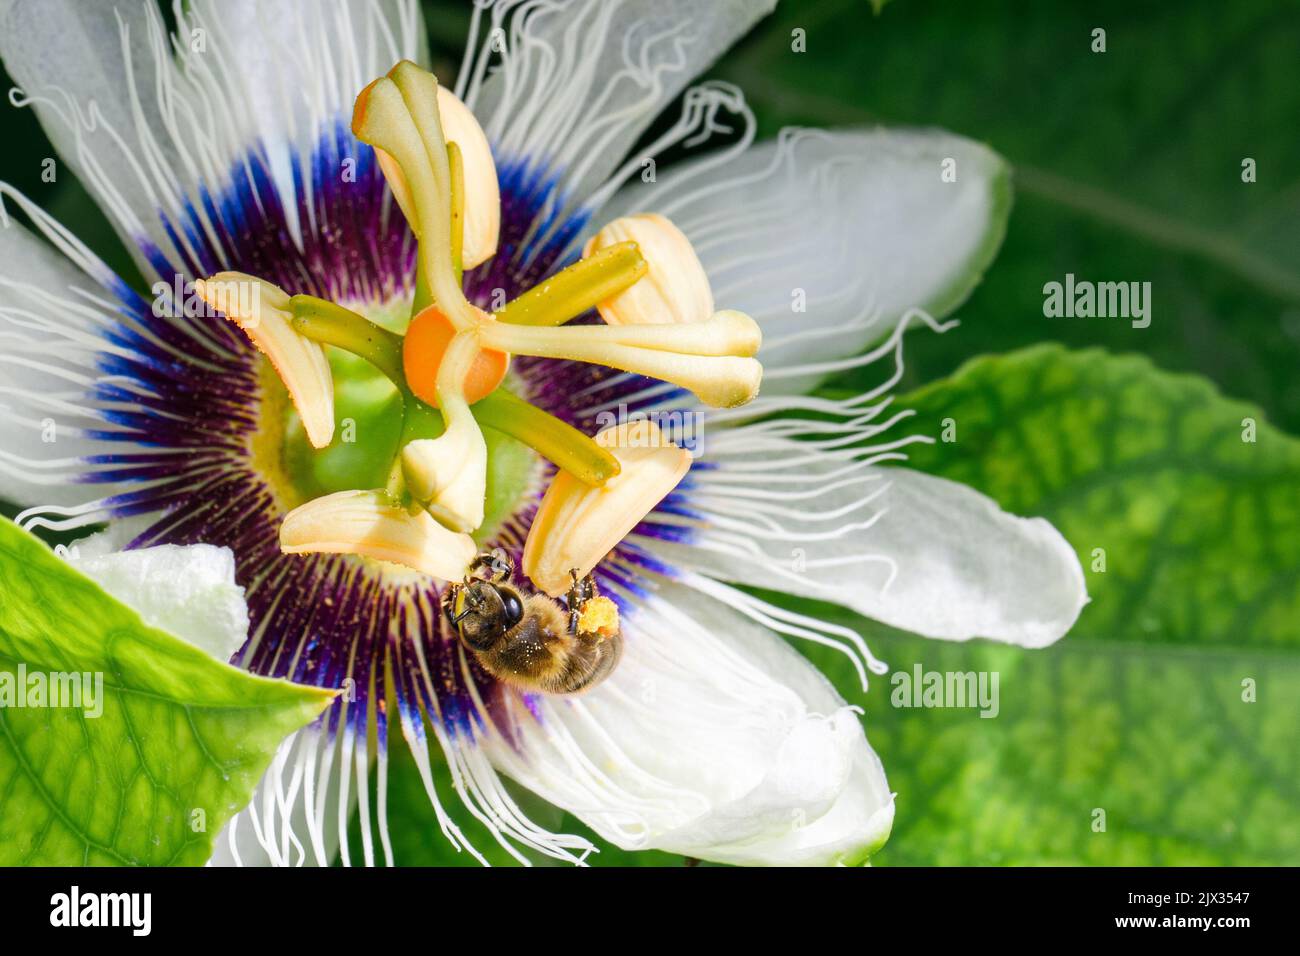 A bee pollinates a passion fruit flower. Imagine a close-up. Stock Photo